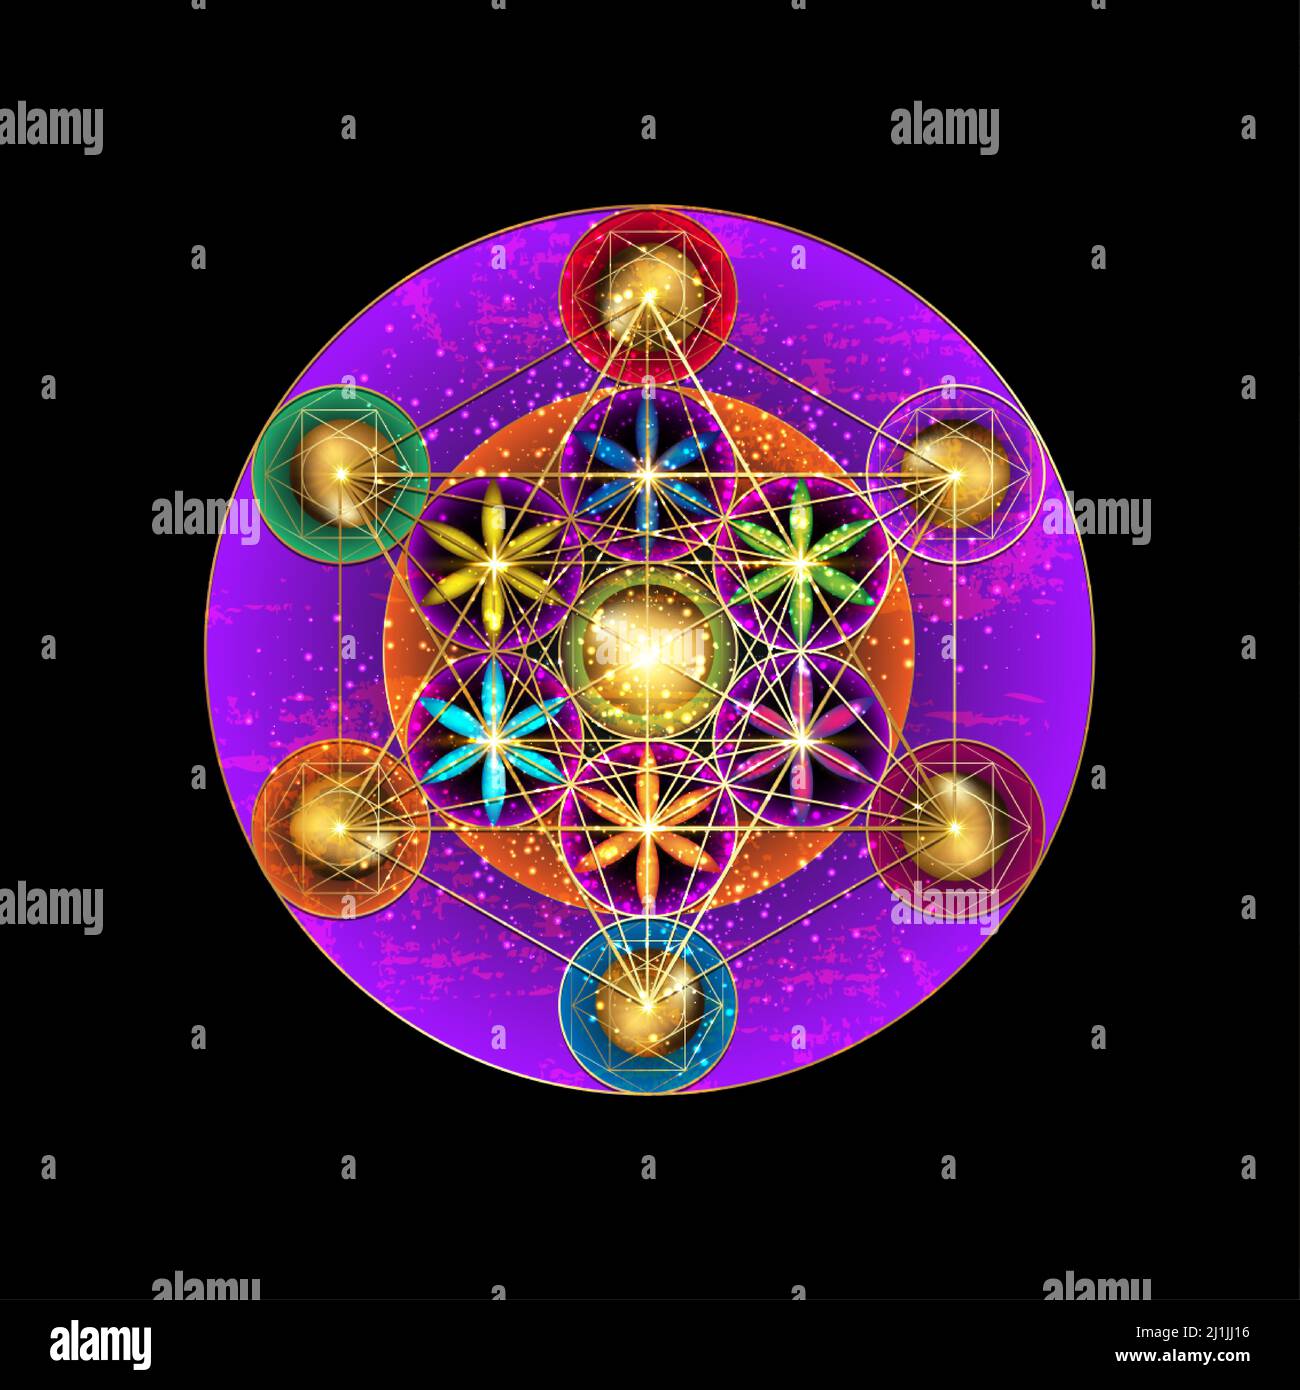 Metatron's Cube,  Flower of Life. Gold Sacred geometry. Old Vintage Mystic icon platonic solids Merkabah, colorful geometric drawing crop circles sign Stock Vector